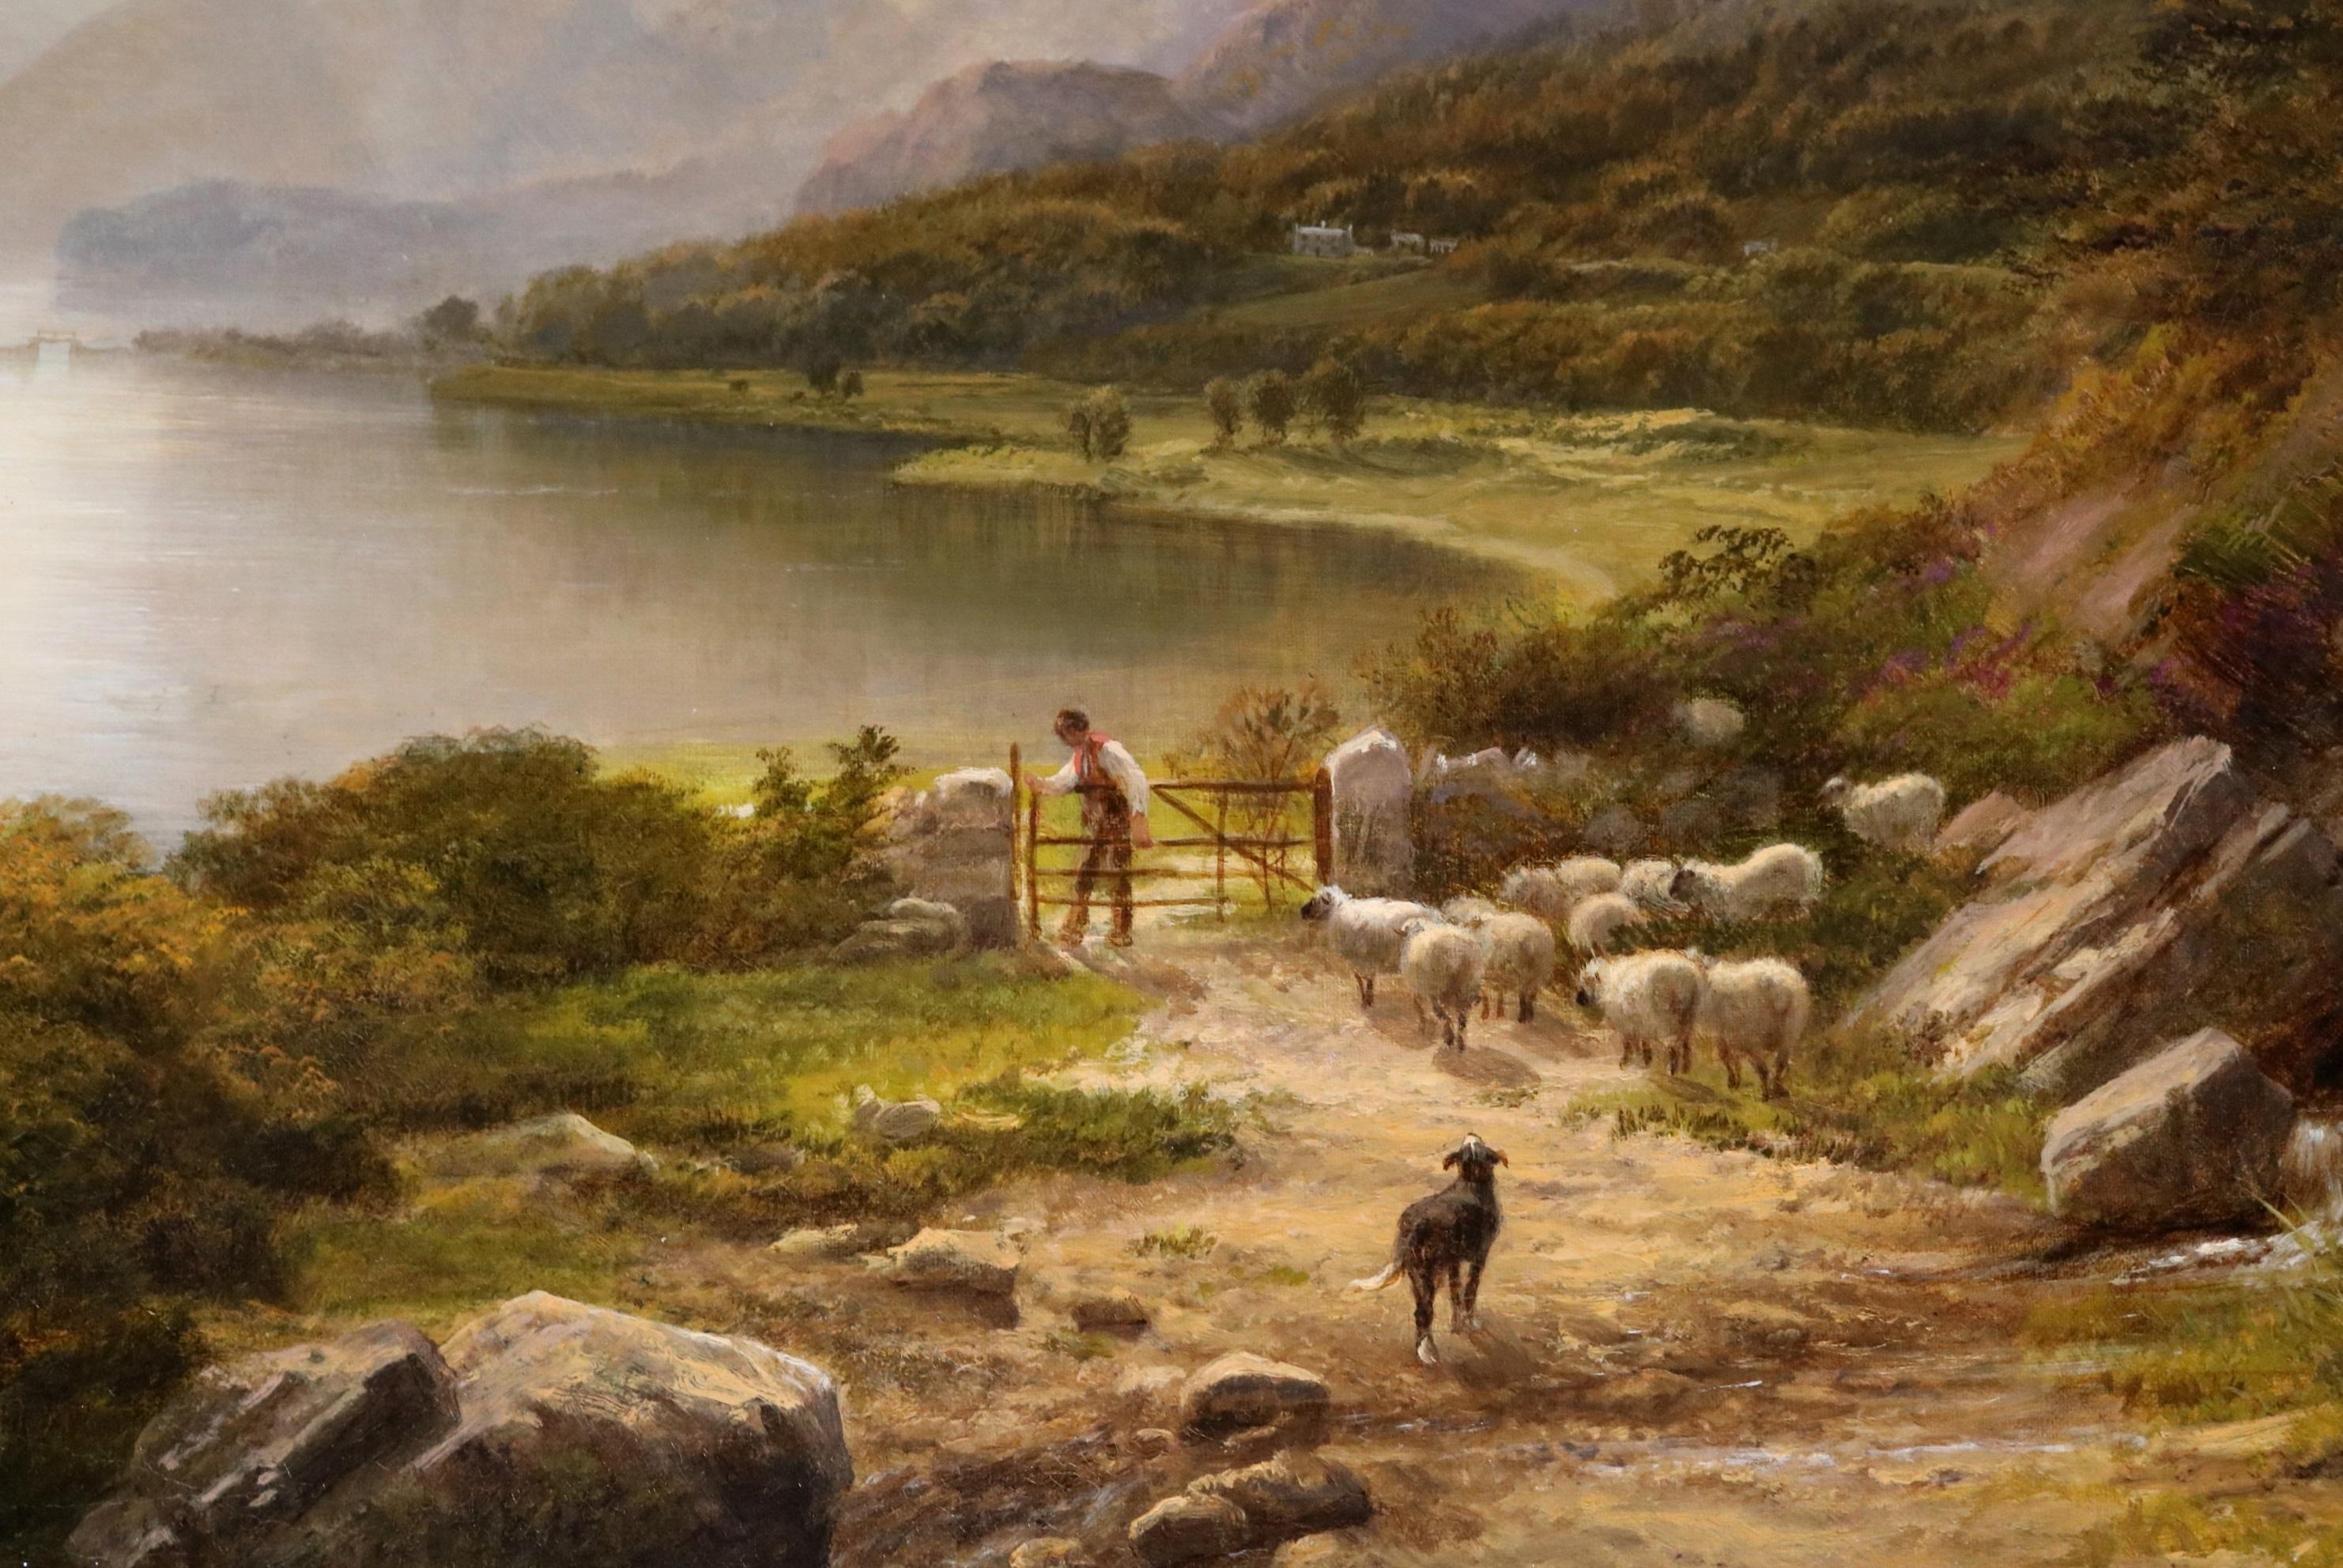 The Lake District - Large 19th Century English Sunset Landscape Painting 5